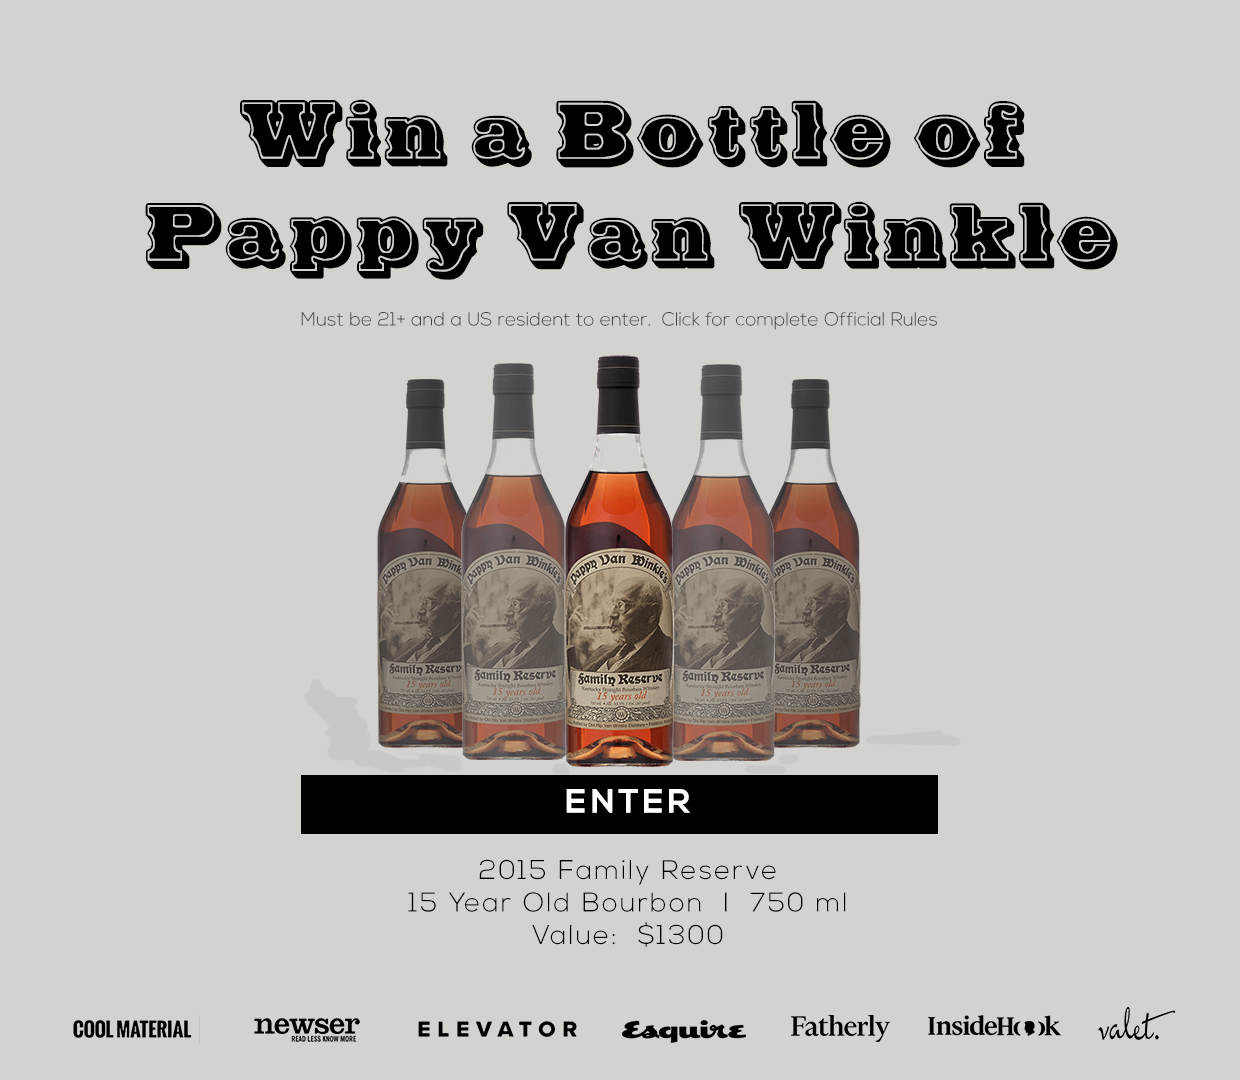 Enter to win a bottle of Pappy Van Winkle: 2015 Family Reserve,15 year old Bourbon, 750 ml. Valued at $1,300. Must be 21+ and a US resident to enter. Click here to see the complete Official Rules